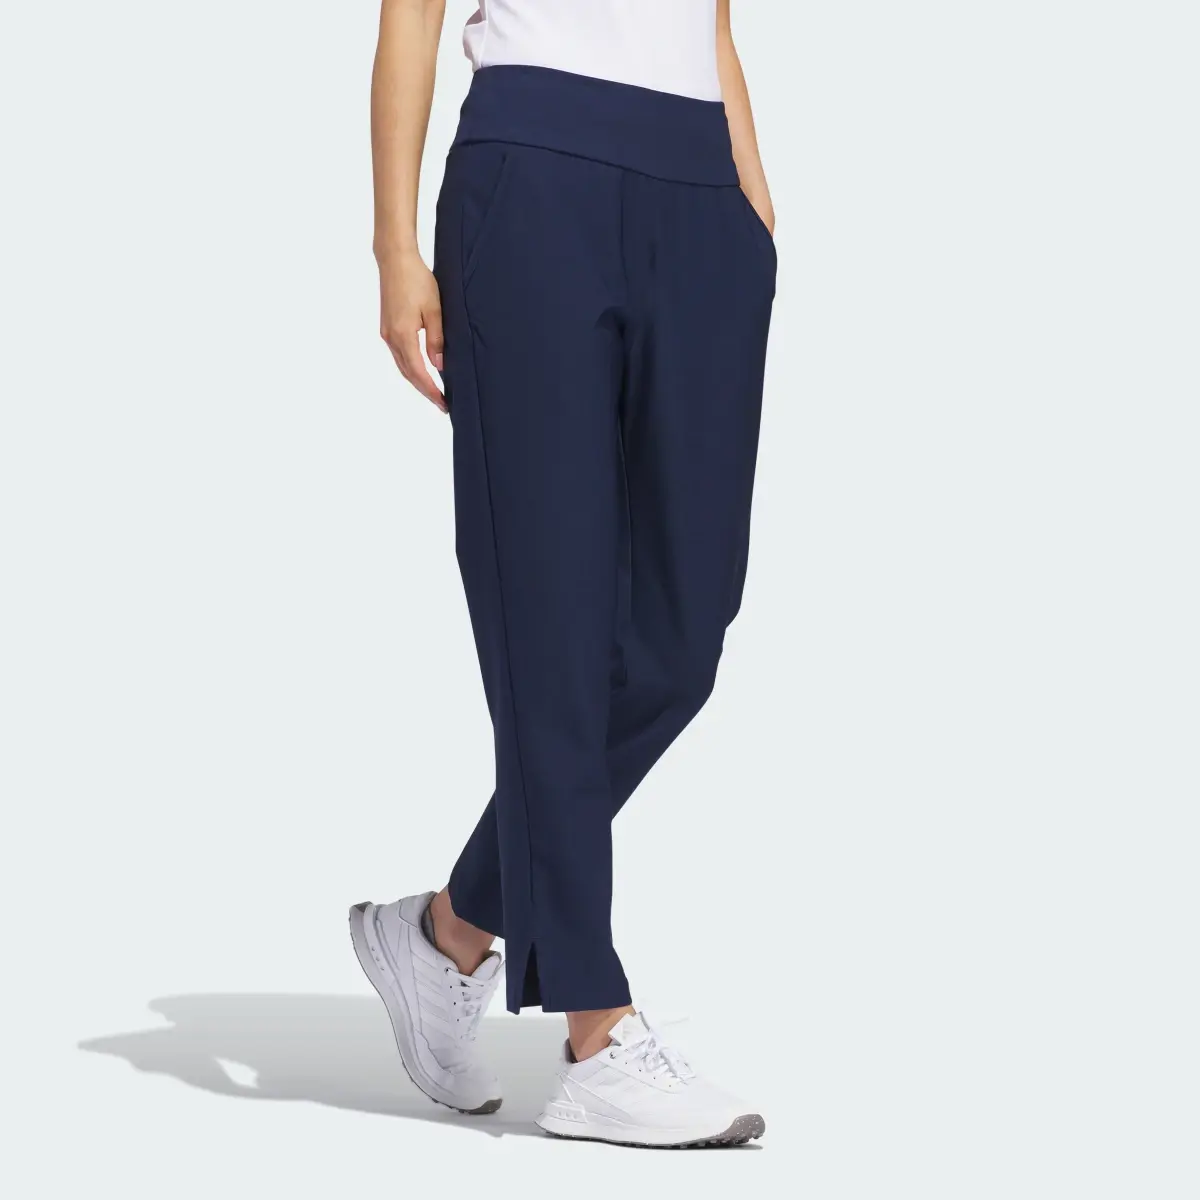 Adidas Ultimate365 Solid Ankle Pants. 3